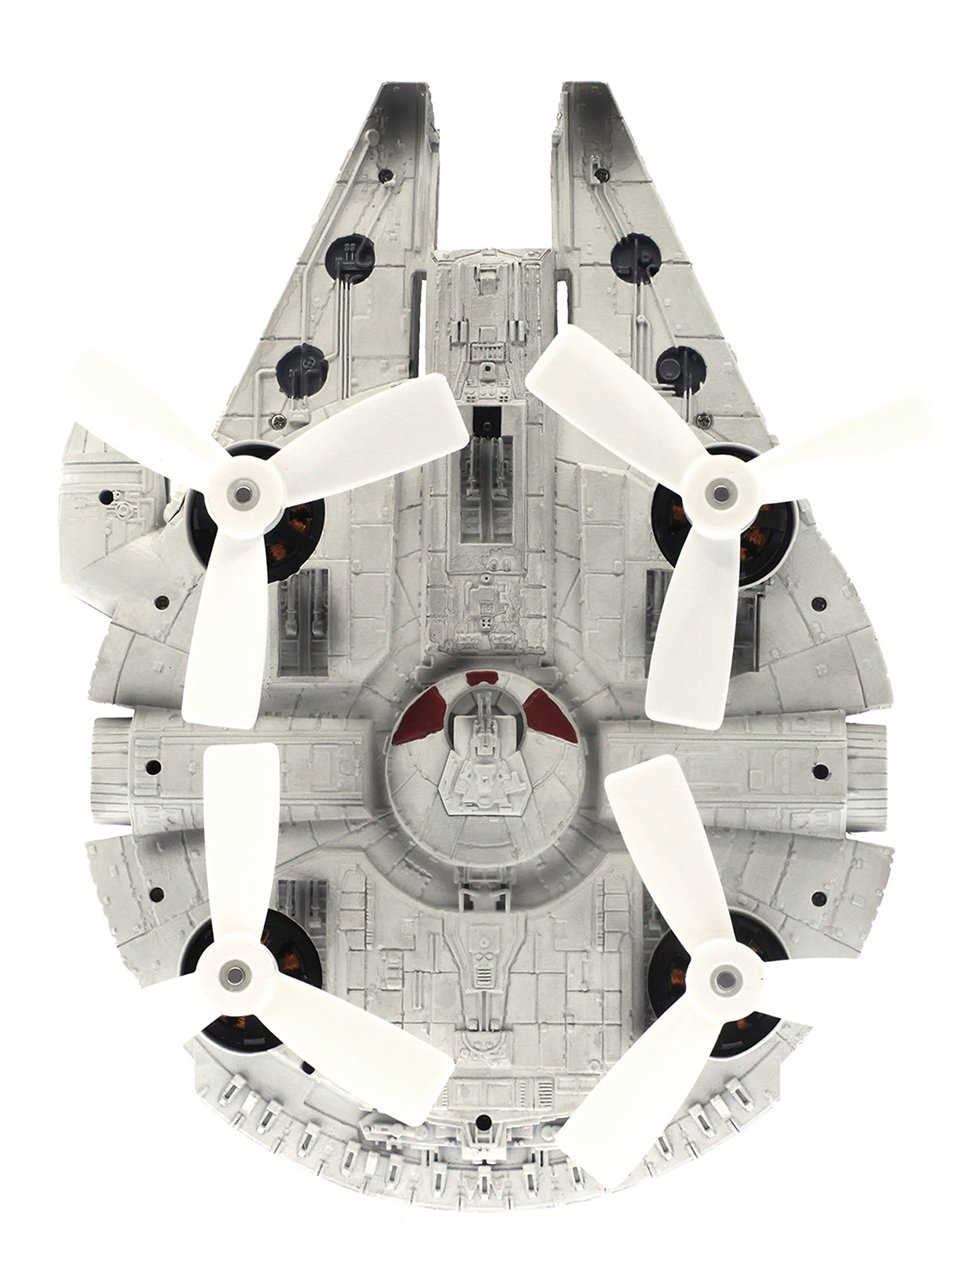 Propel Star Wars Quadcopters